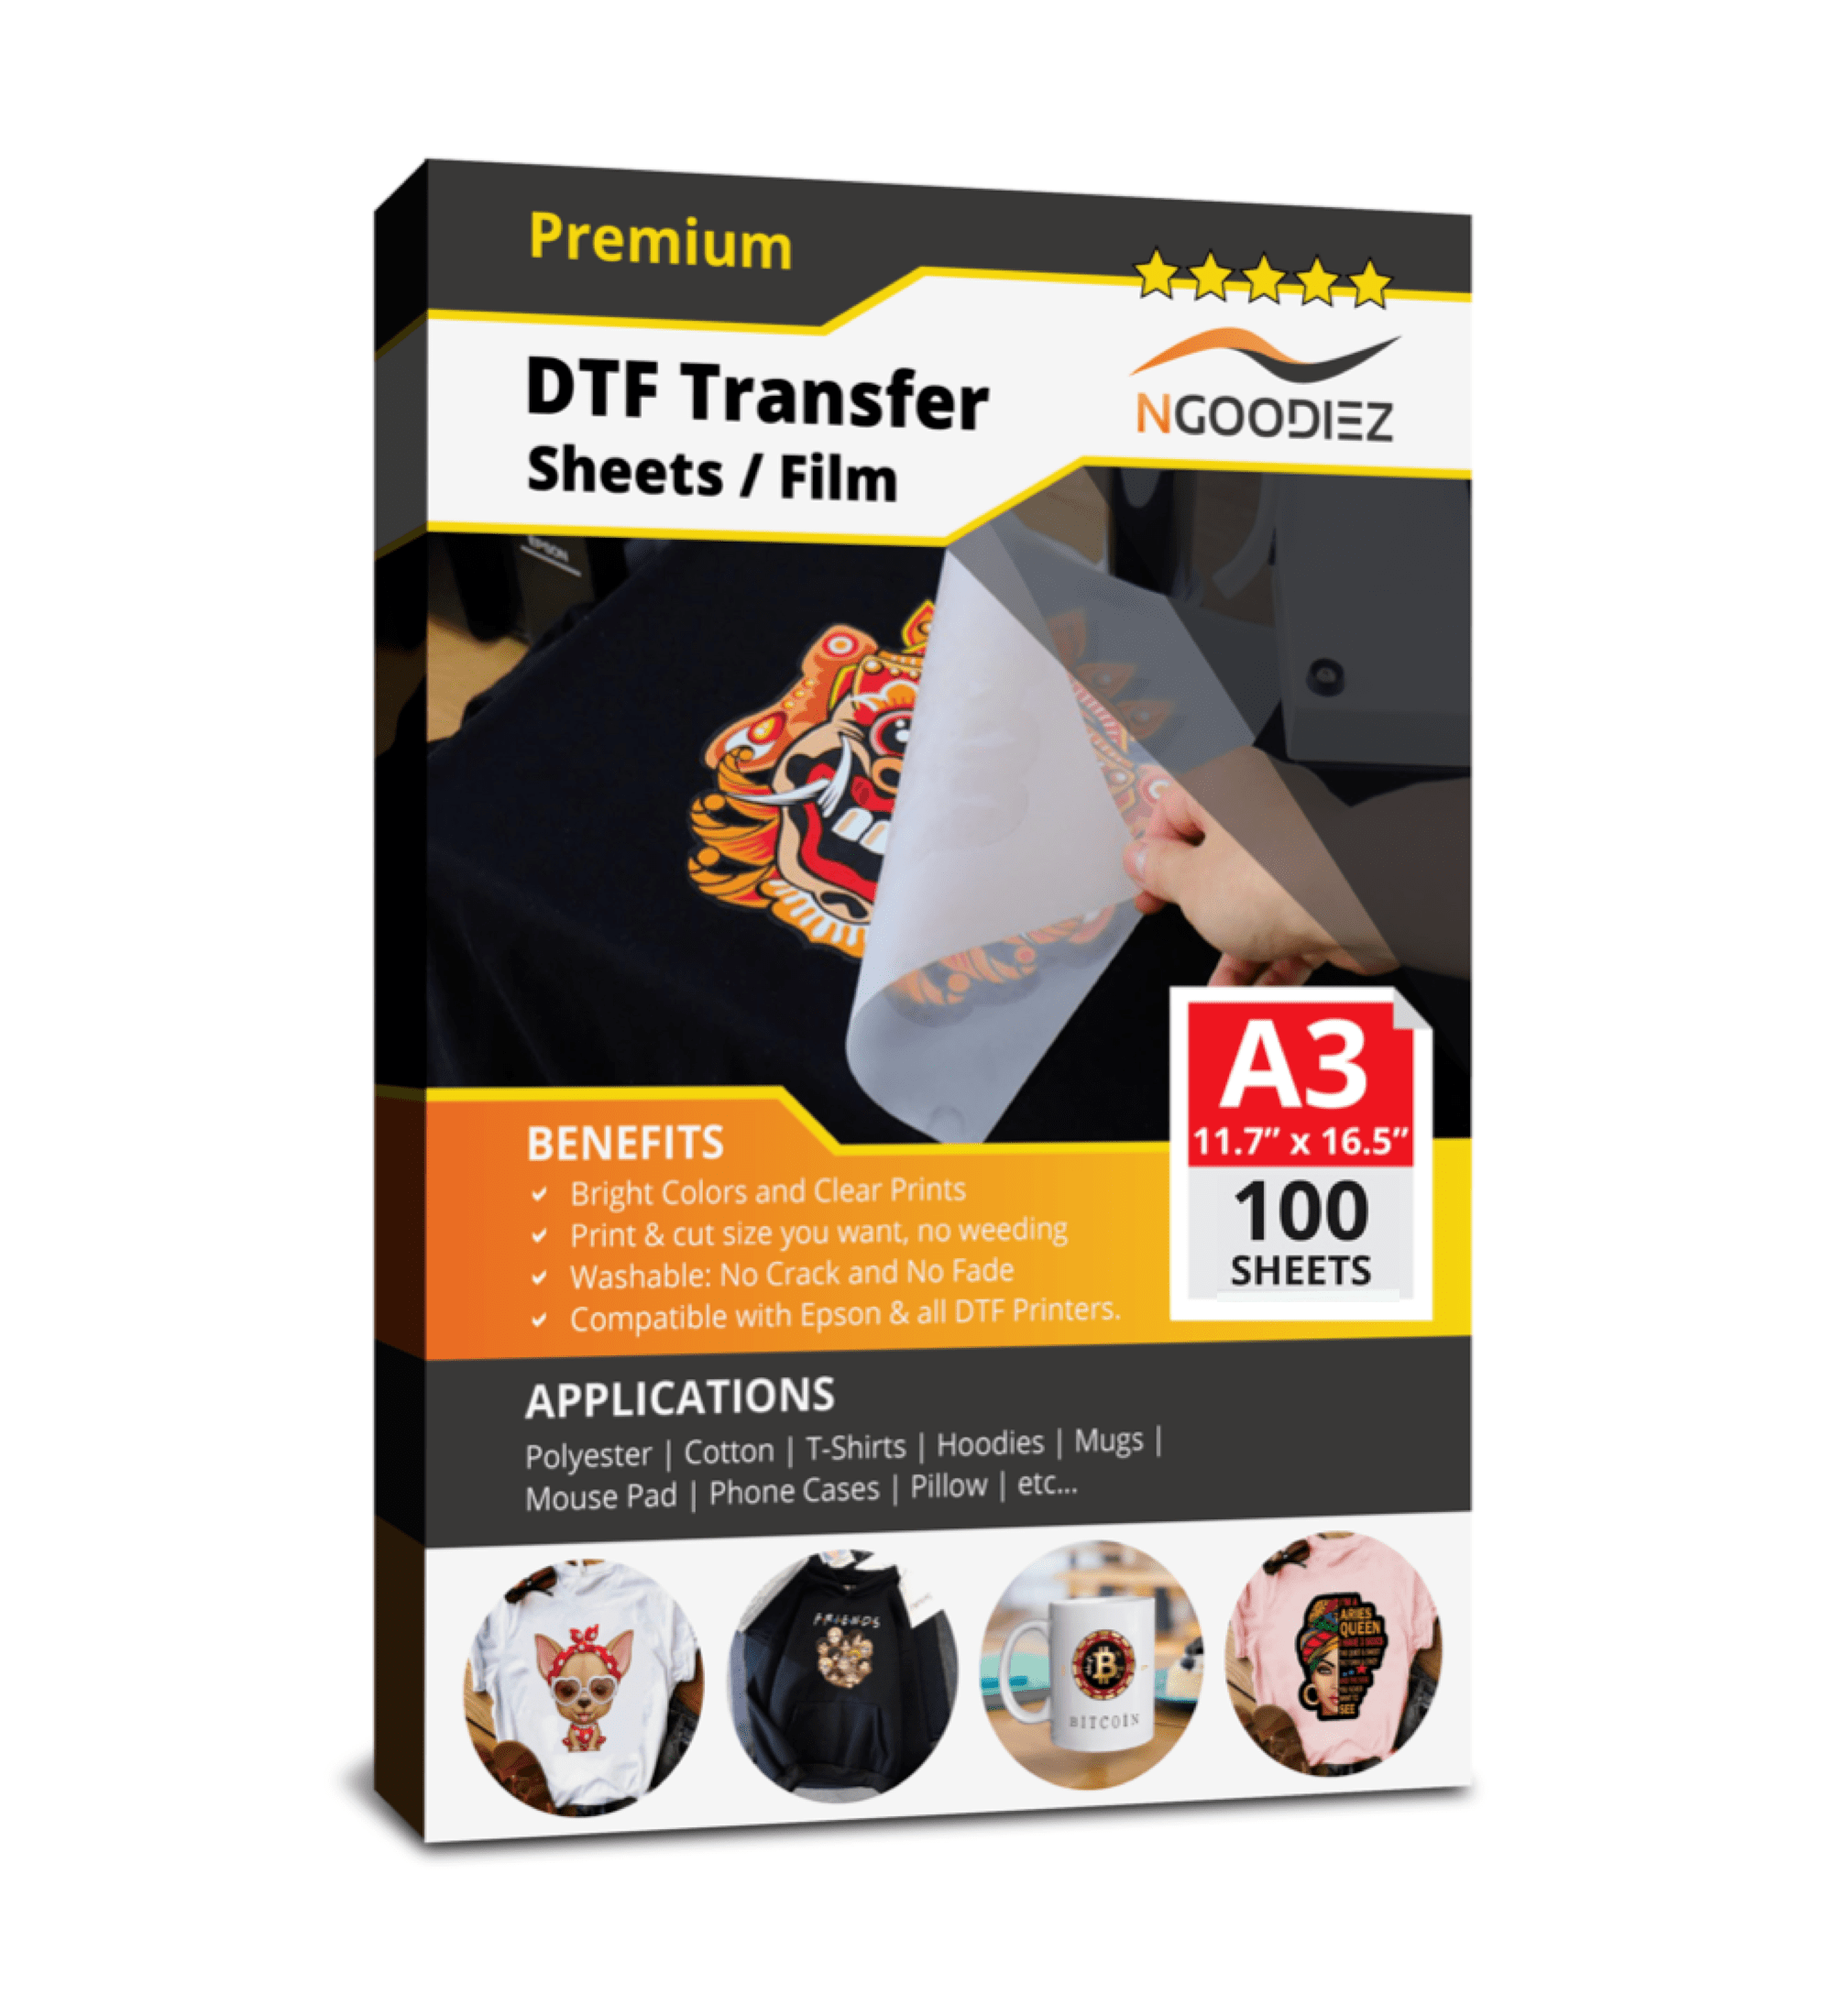 A3 (11.7 x 16.5) DTF Transfer Film - 30 Sheets of Double-Sided Matte  Clear PreTreat Sheets for DIY Direct Printing on T-shirts and Textiles.  Utilize PET Heat Transfer Paper for professional results